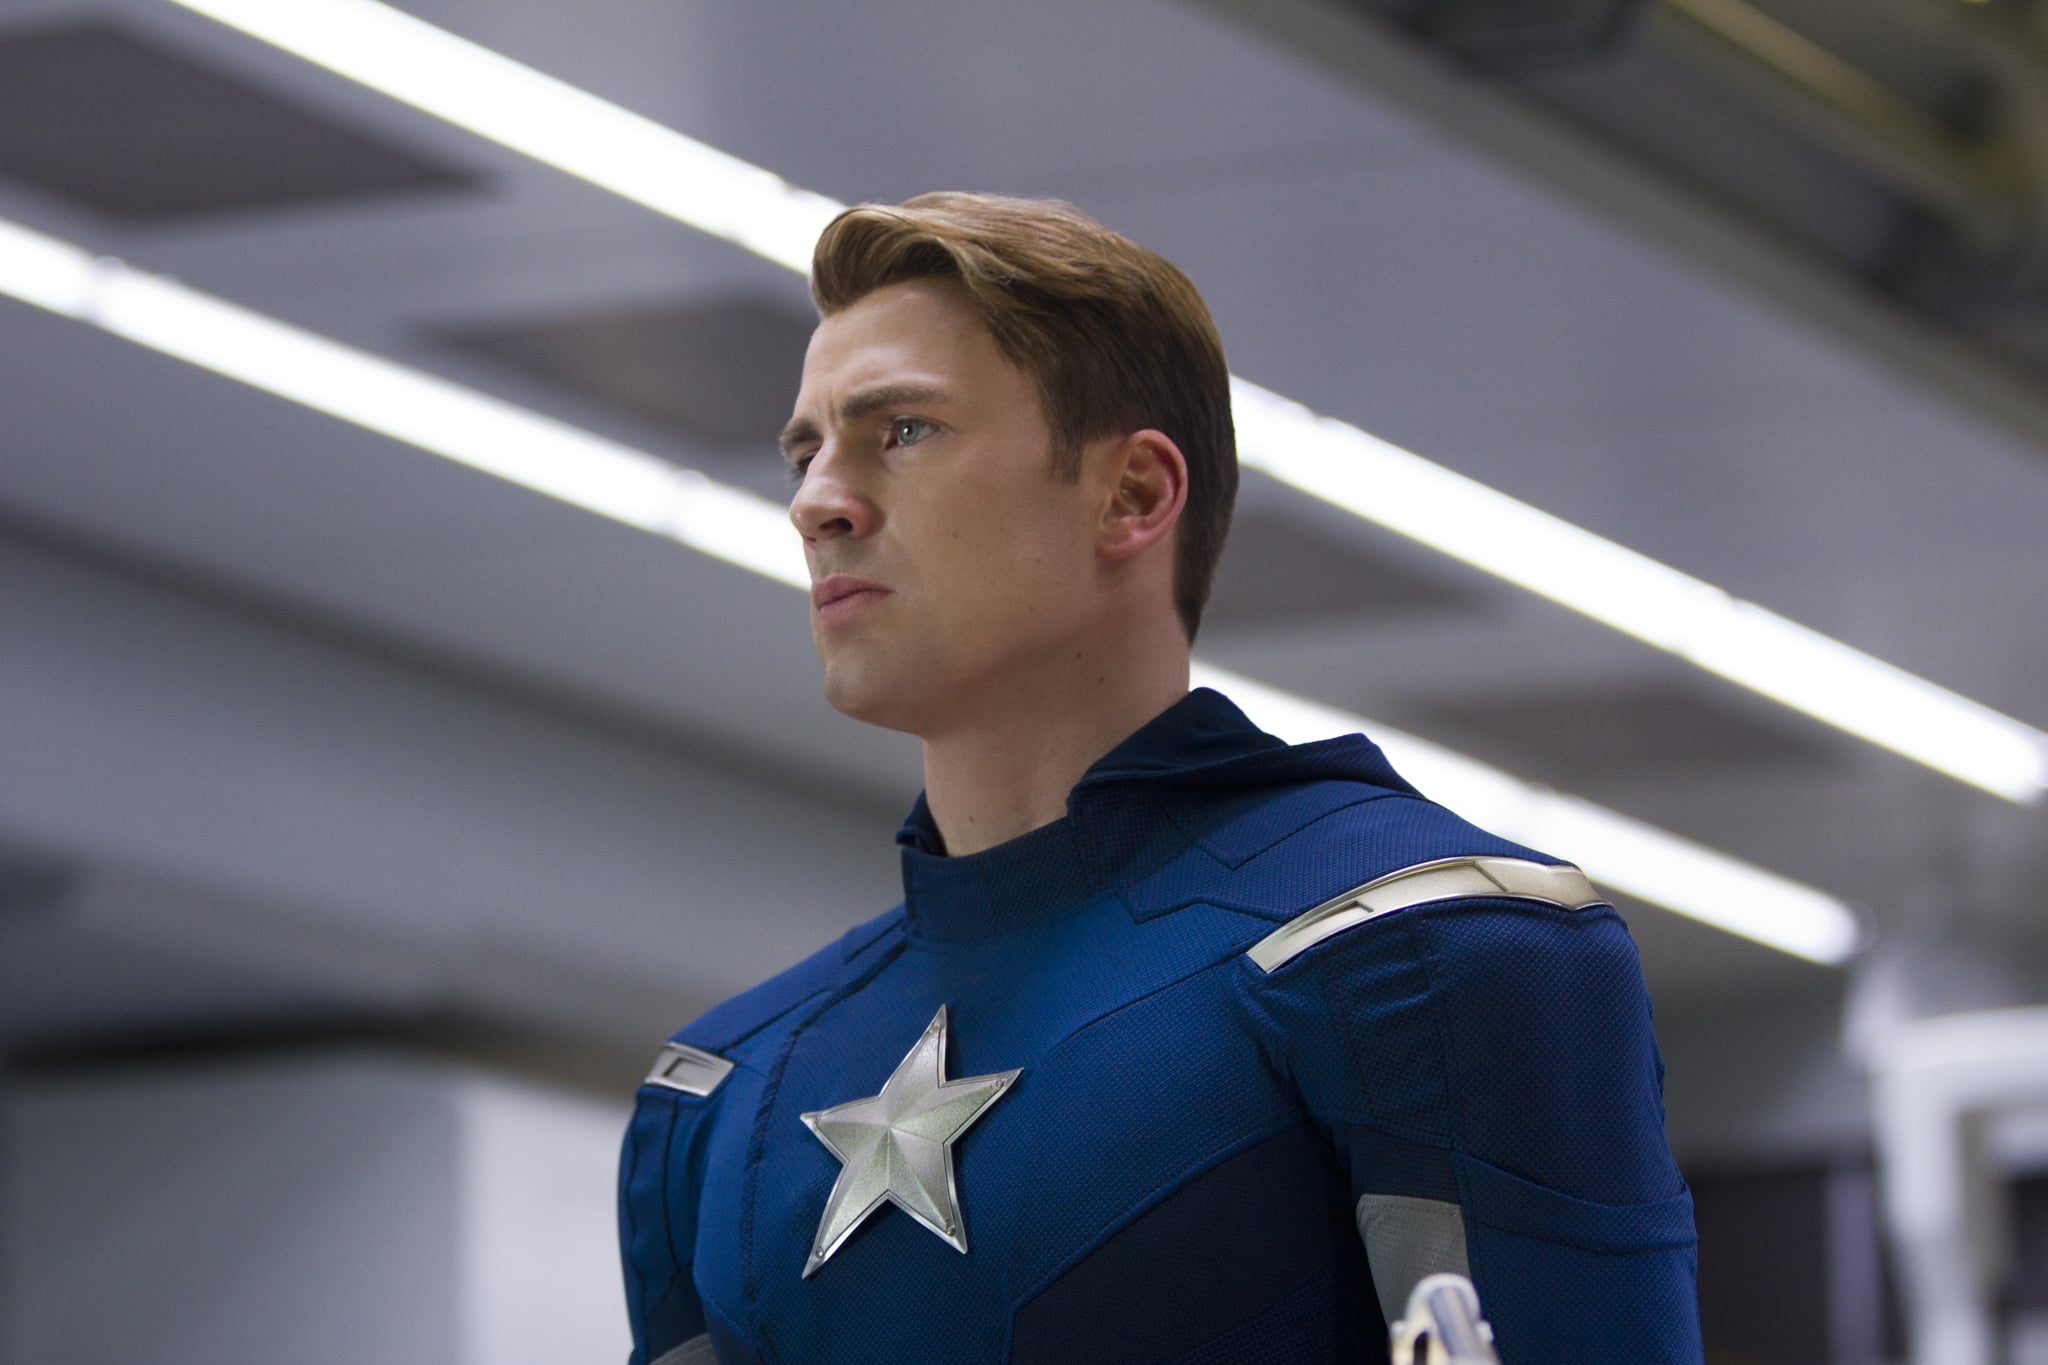 Chris Evans As Captain America In The Avengers See All Of The Pictures From The Avengers